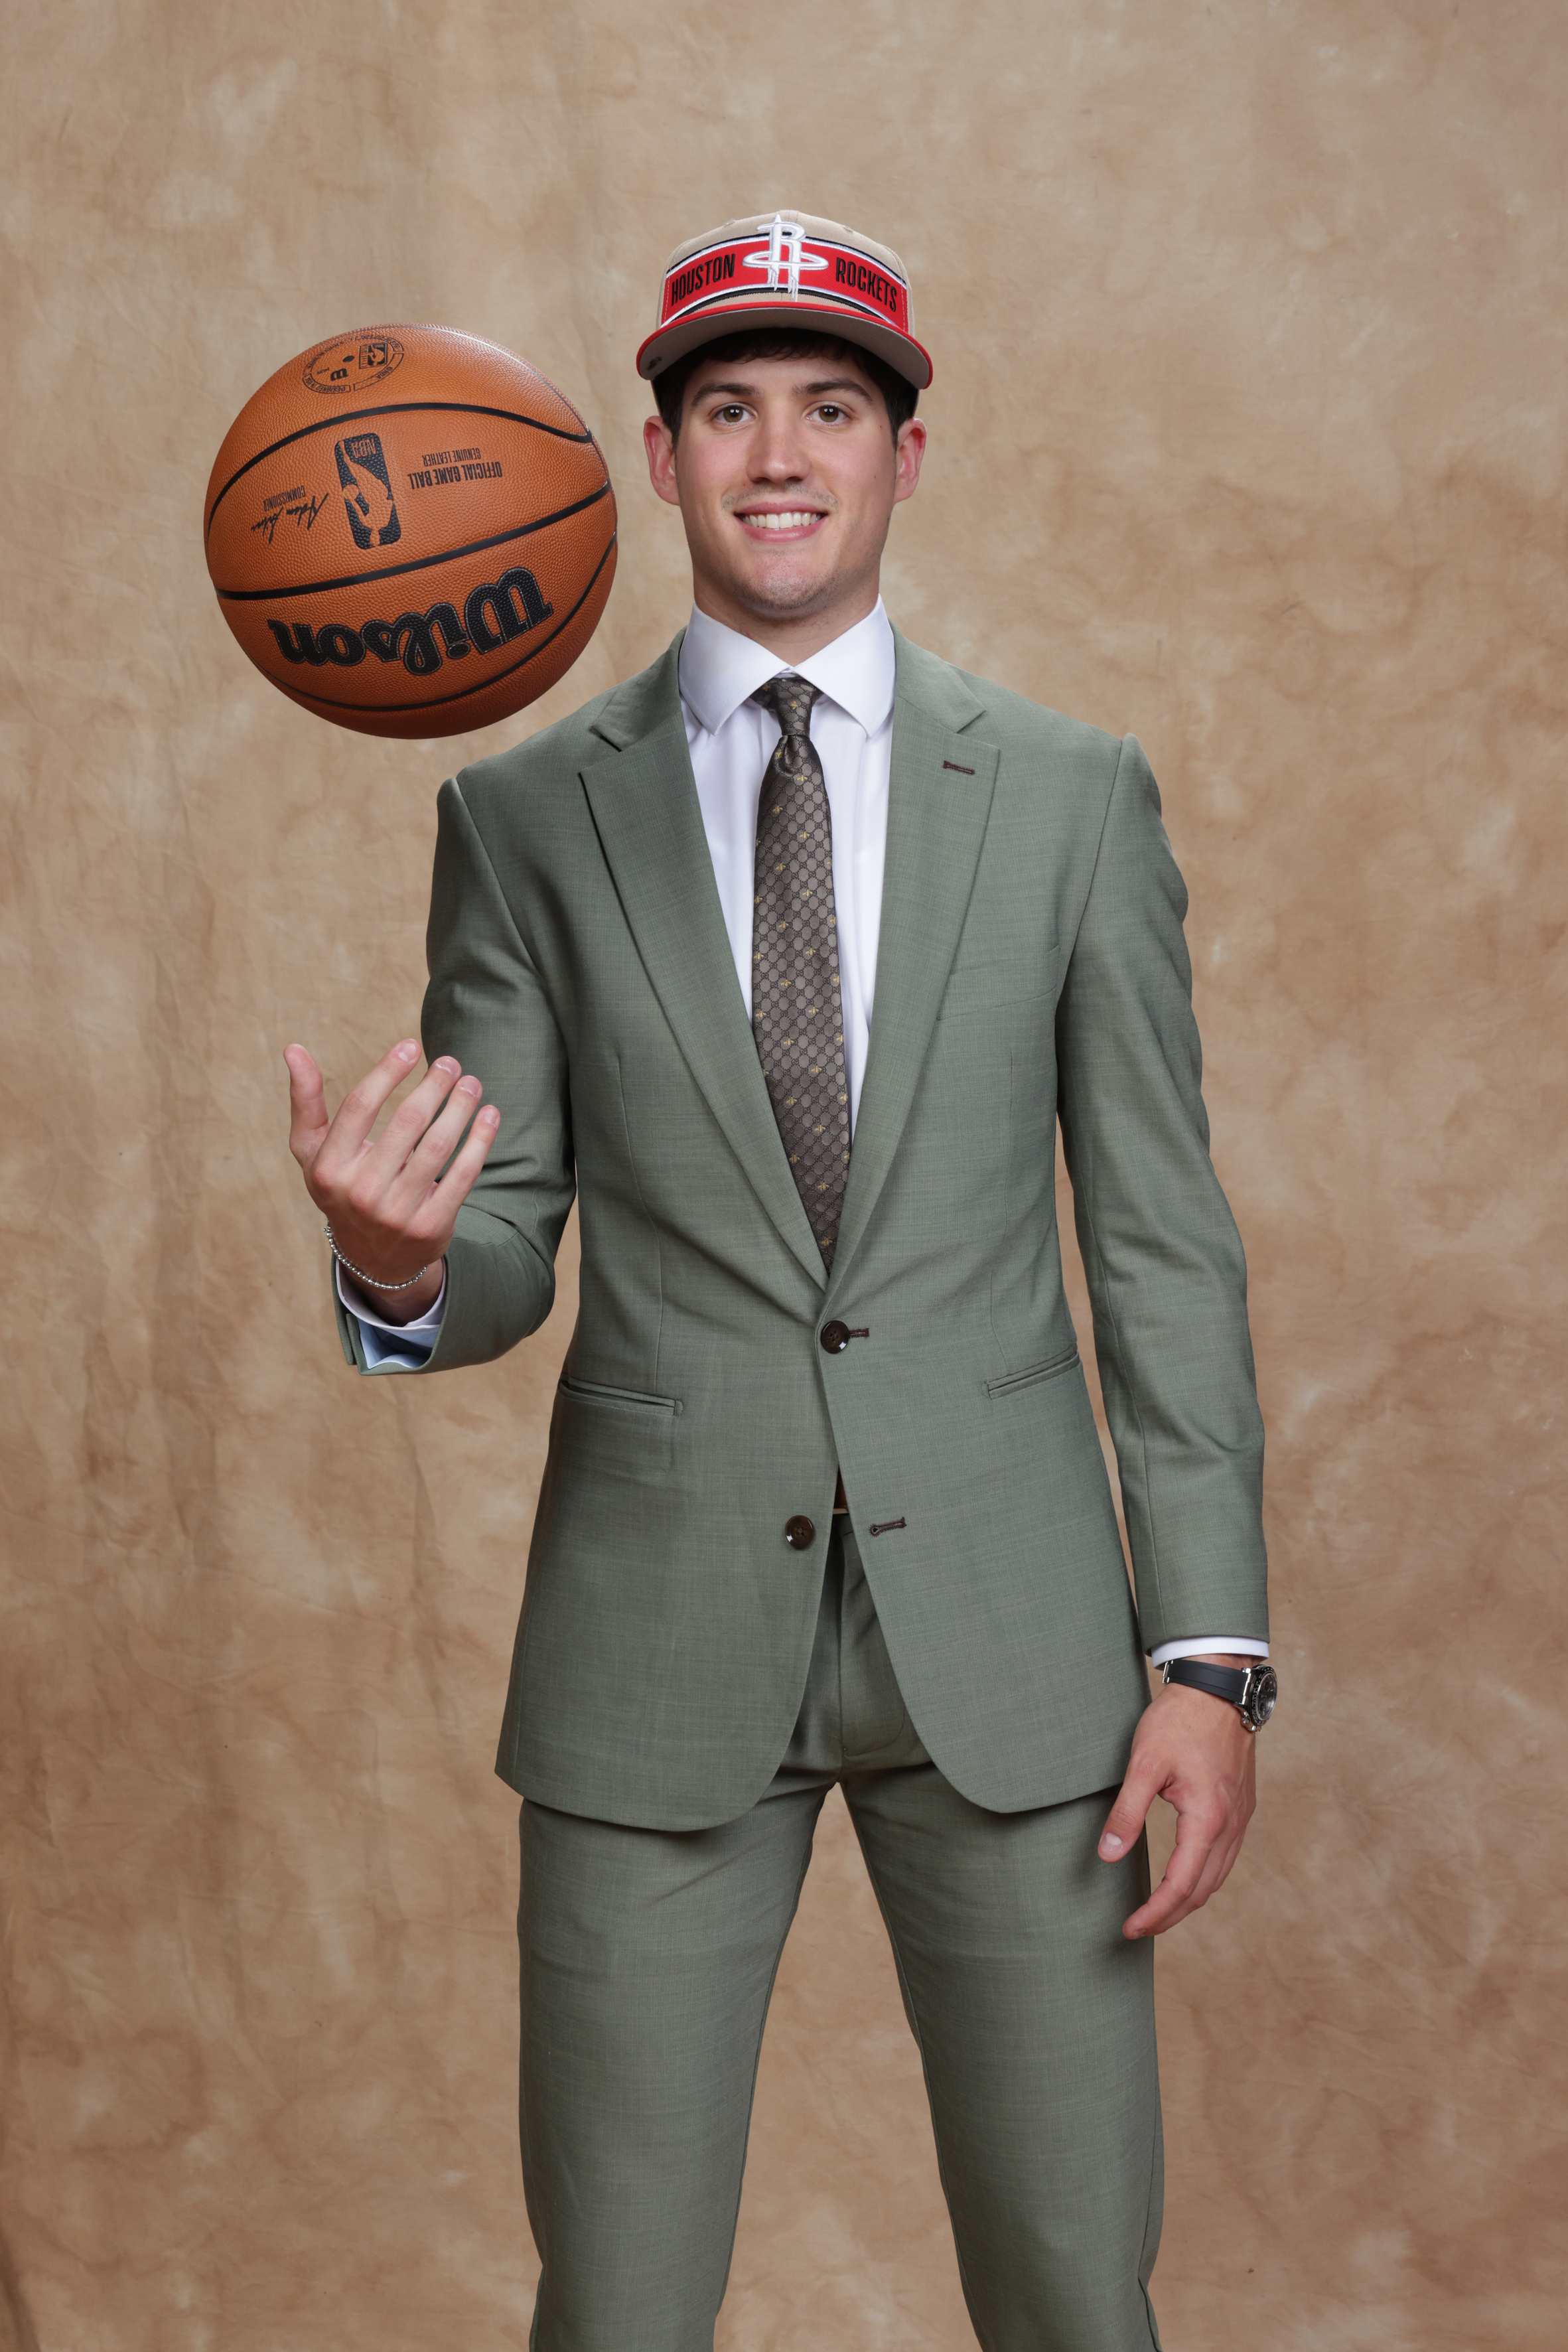 Reed Shepperd NBA Draft outfit